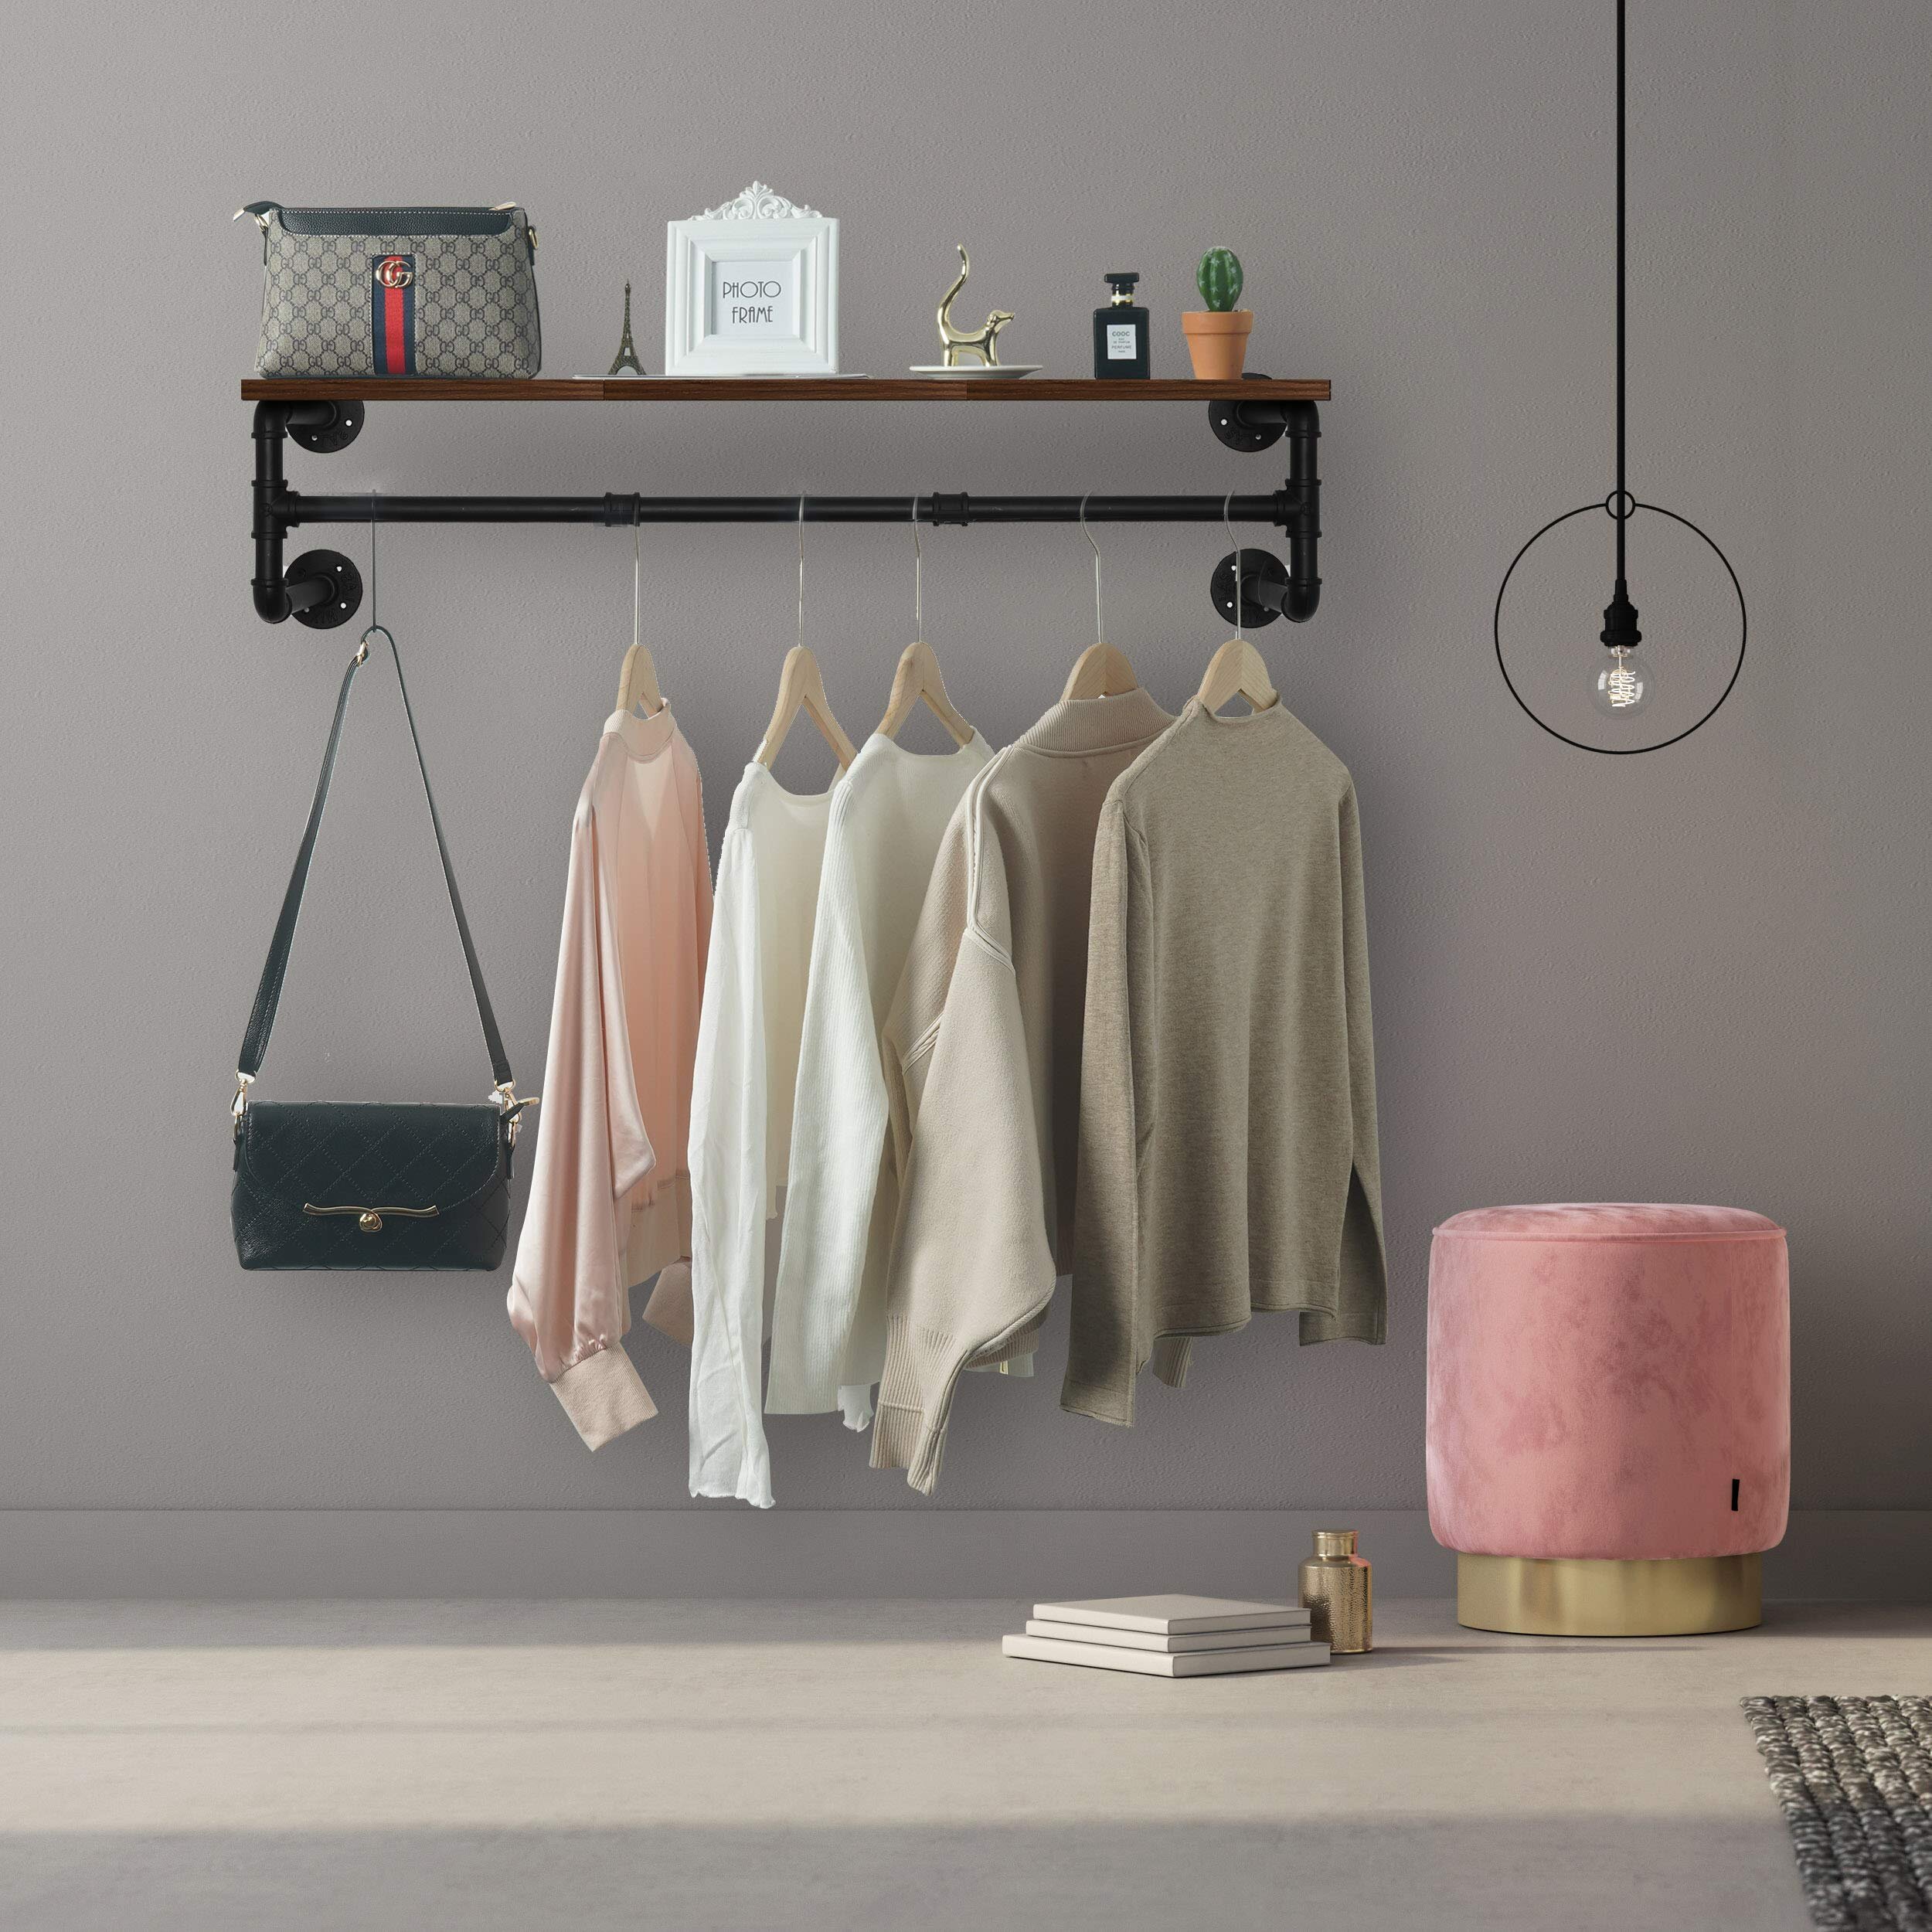 Details about   New Nebula Wall Mounted Clothes Rack Aluminium Fordable Rack Indoor/ Outdoor Use 